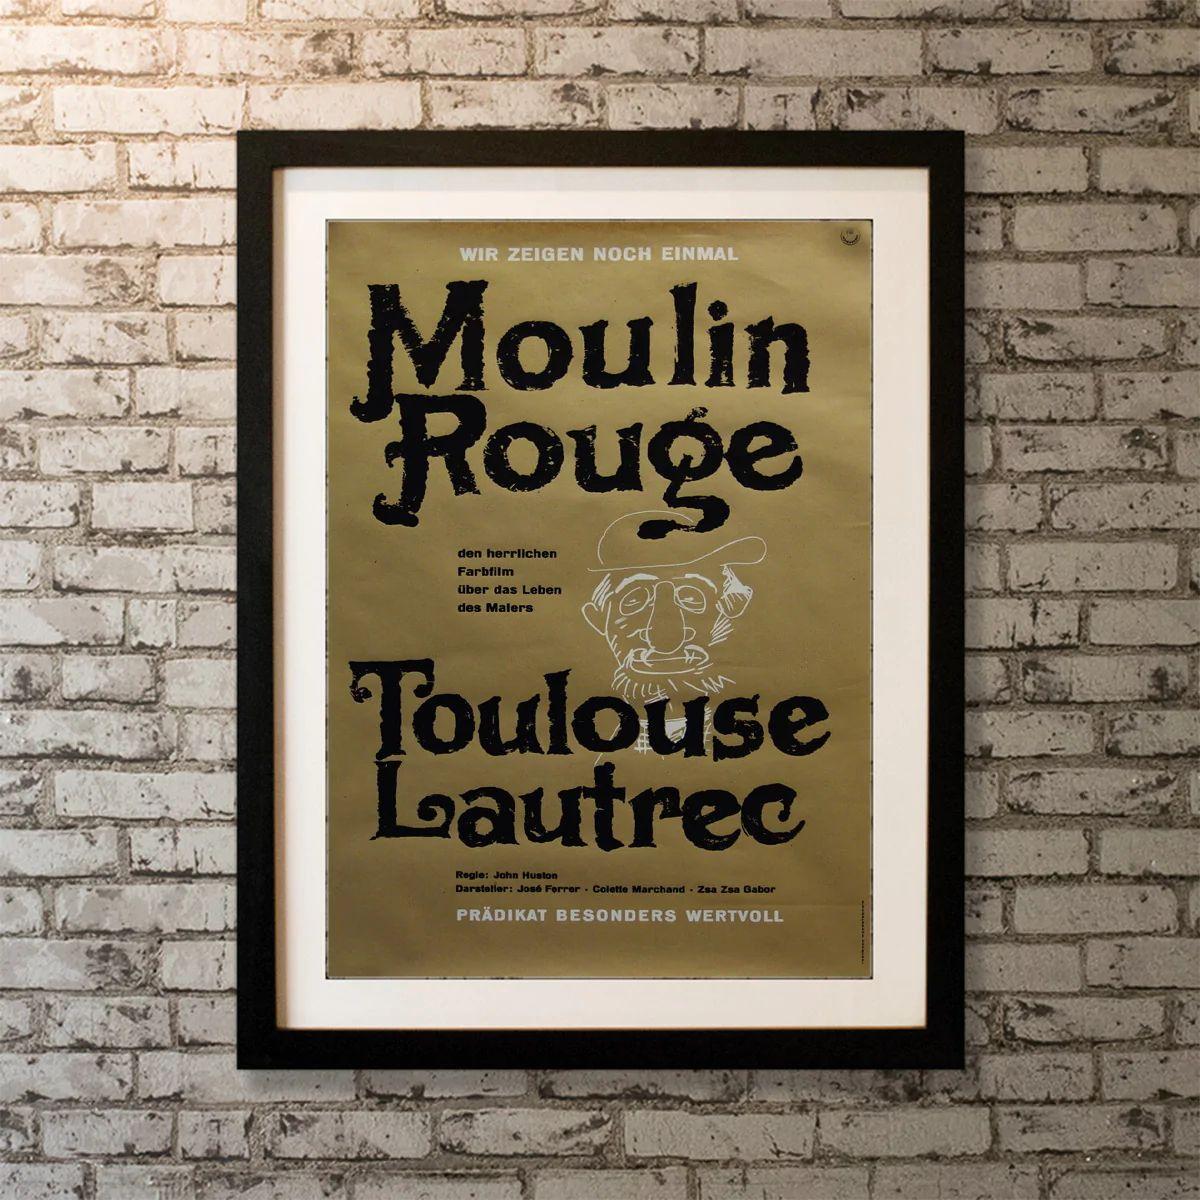 Moulin Rouge, Unframed Poster, 1970's

Original German Plakat (23 X 33 Inches). Fictional account of French artist Henri de Toulouse-Lautrec.

Year: 1970's release
Nationality: Germany
Condition: Folded-As-Issued
Type: German Plakat
Size: 22